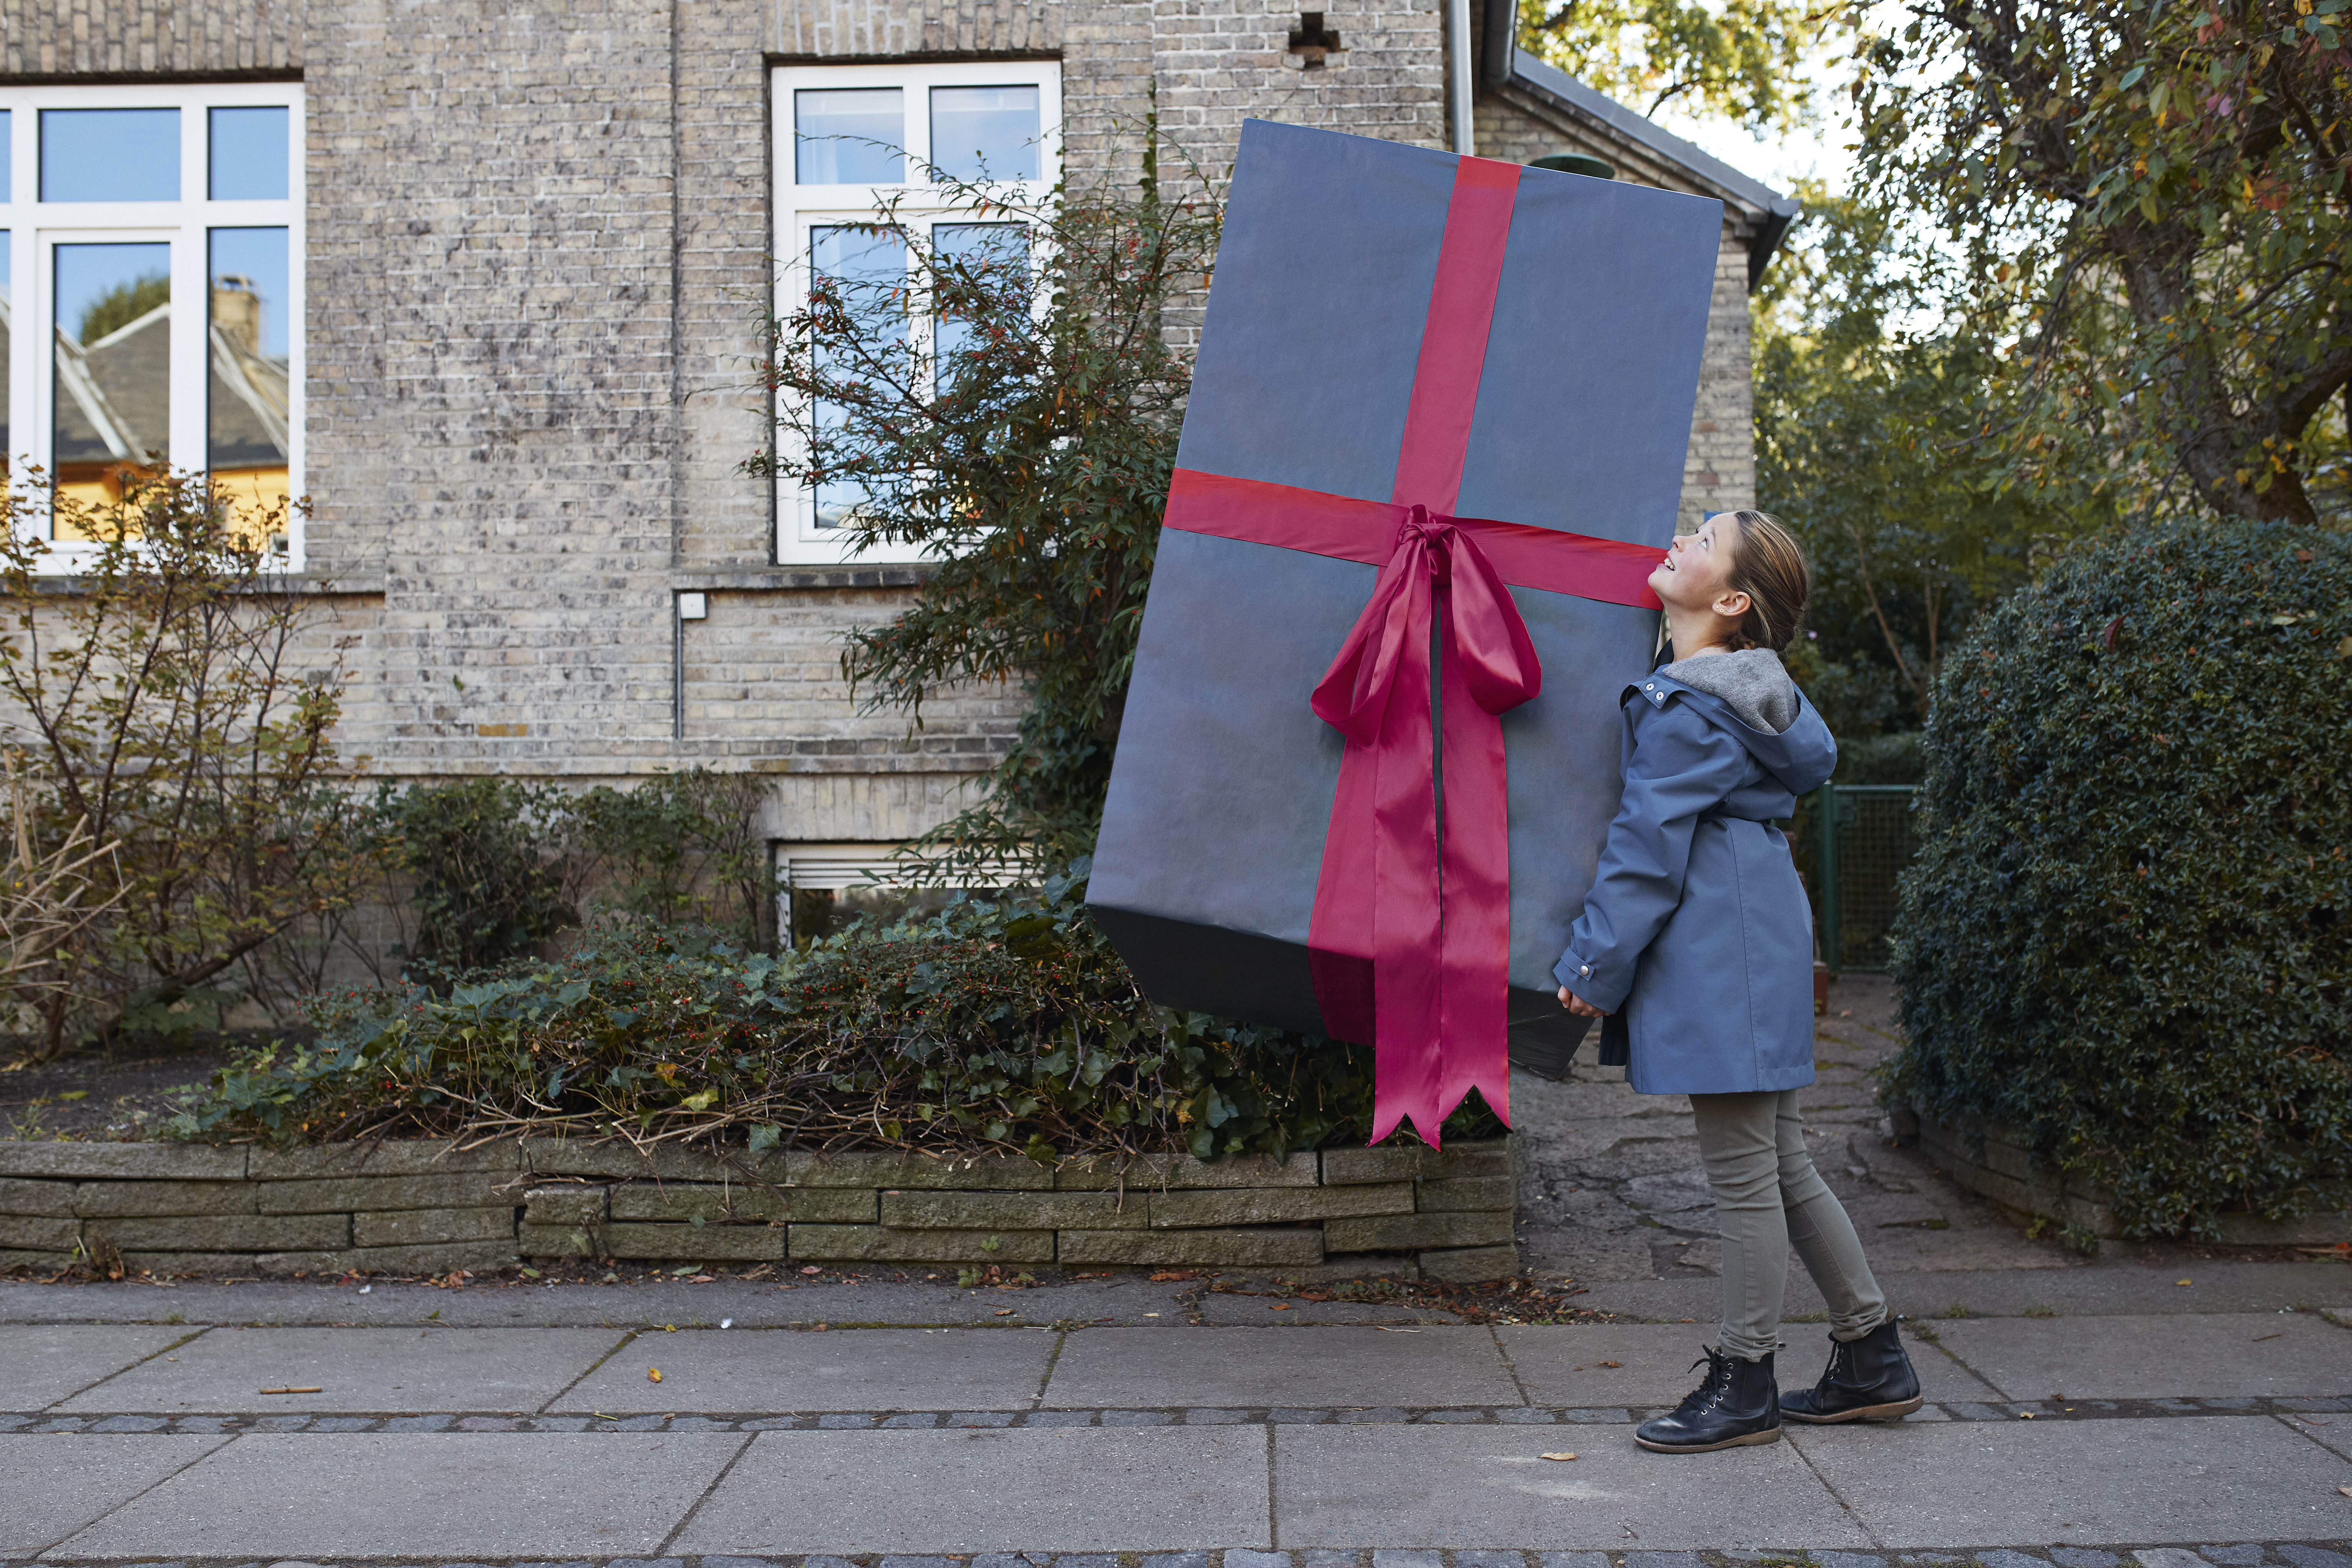 A girl with a big, wrapped gift | Source: Getty Images